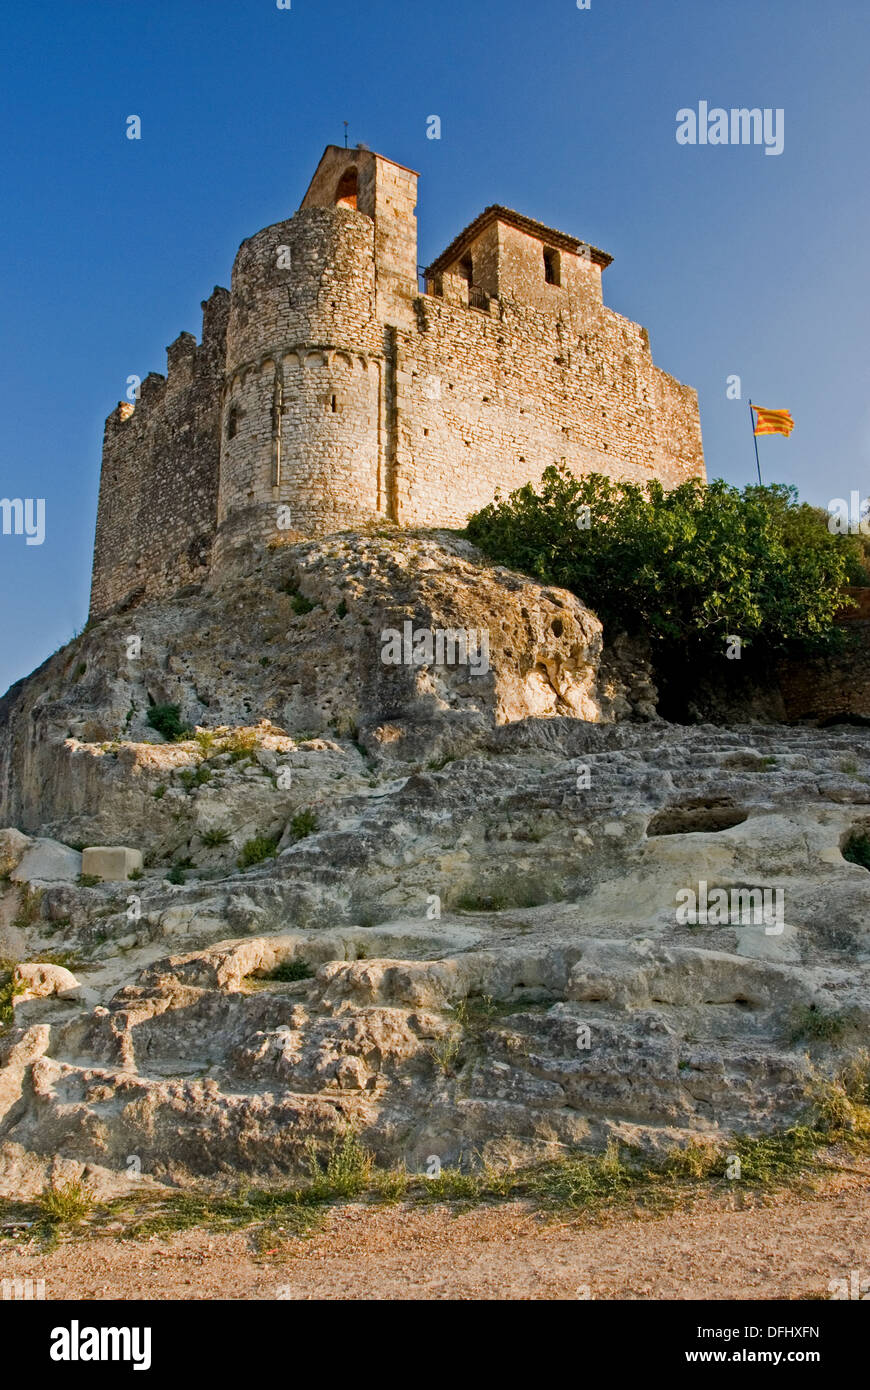 Castell Santa Creu stands on a rocky outcrop overlooking the old town of Calafell in the Catalan region of Spain. Stock Photo